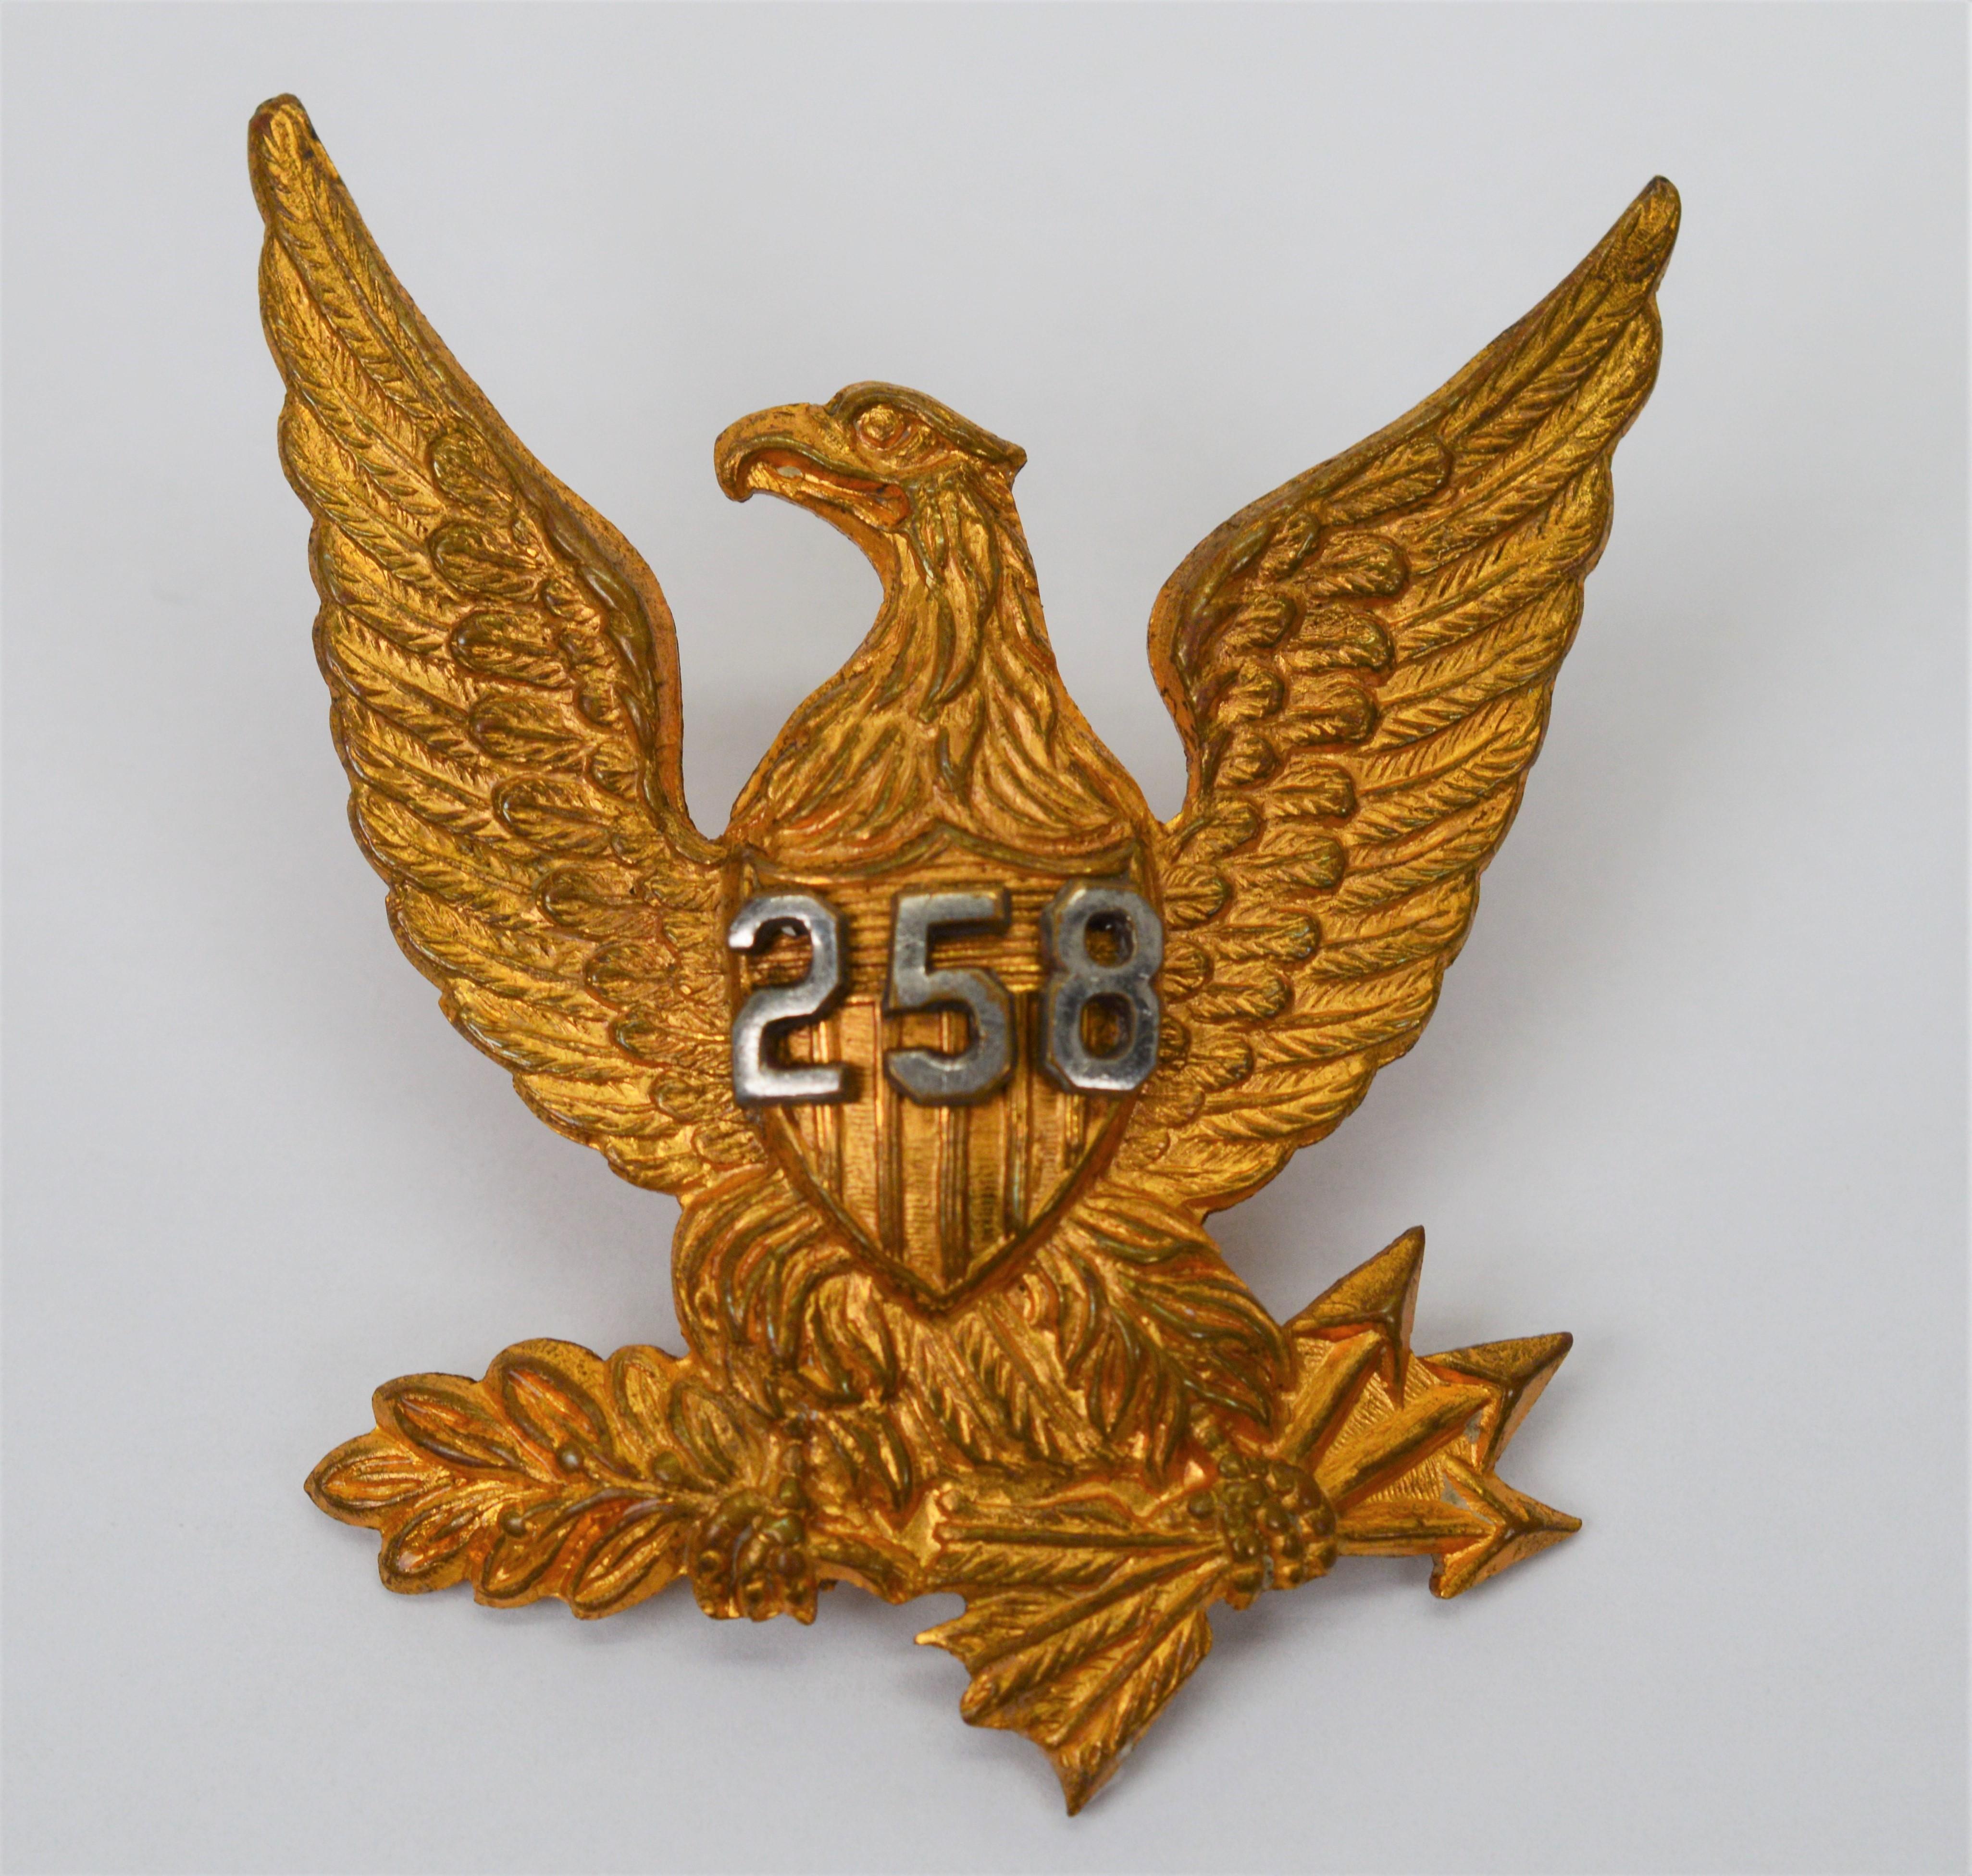 Circa 1872, this antique brass U.S. Army Dress Cap Badge is a rare and unusual find. The battalion marking, 258, is proudly displayed across the eagle's chest. The cap badge measures 1-7/8 wing to wing and the same head to feathers. The back of the